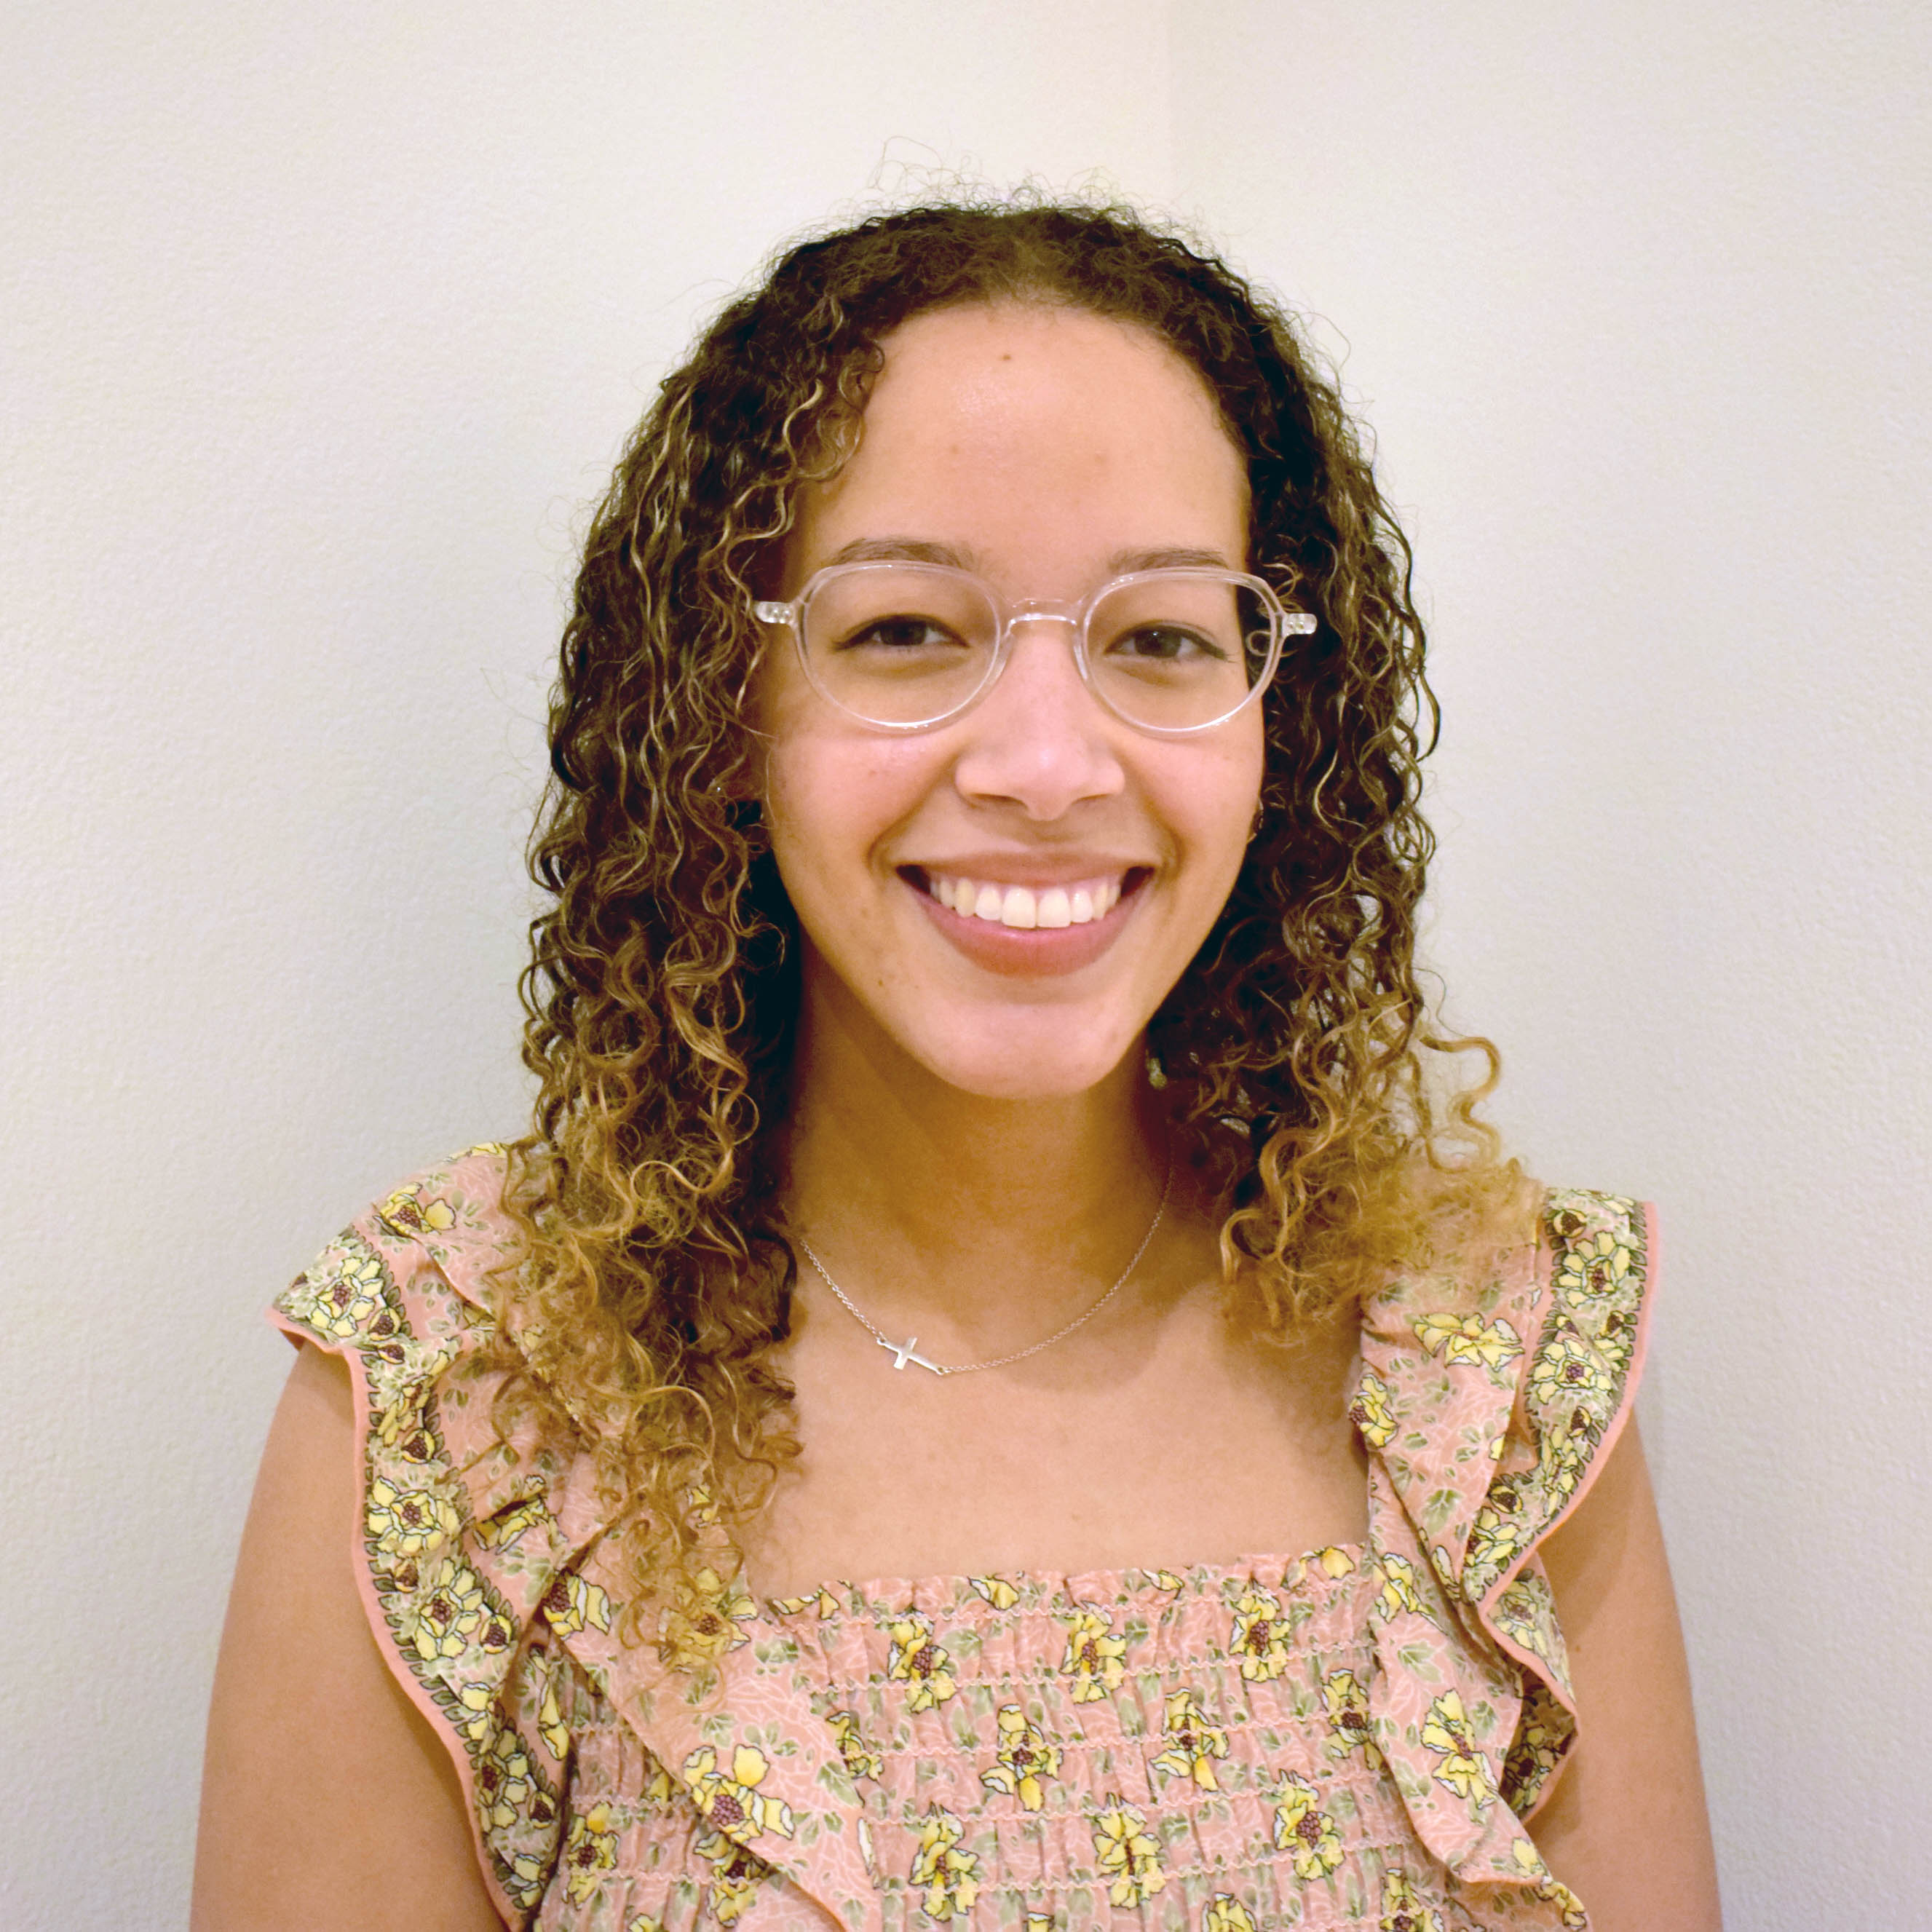 Yady Rivero is Assistant Curator at the Patricia & Phillip Frost Art Museum.